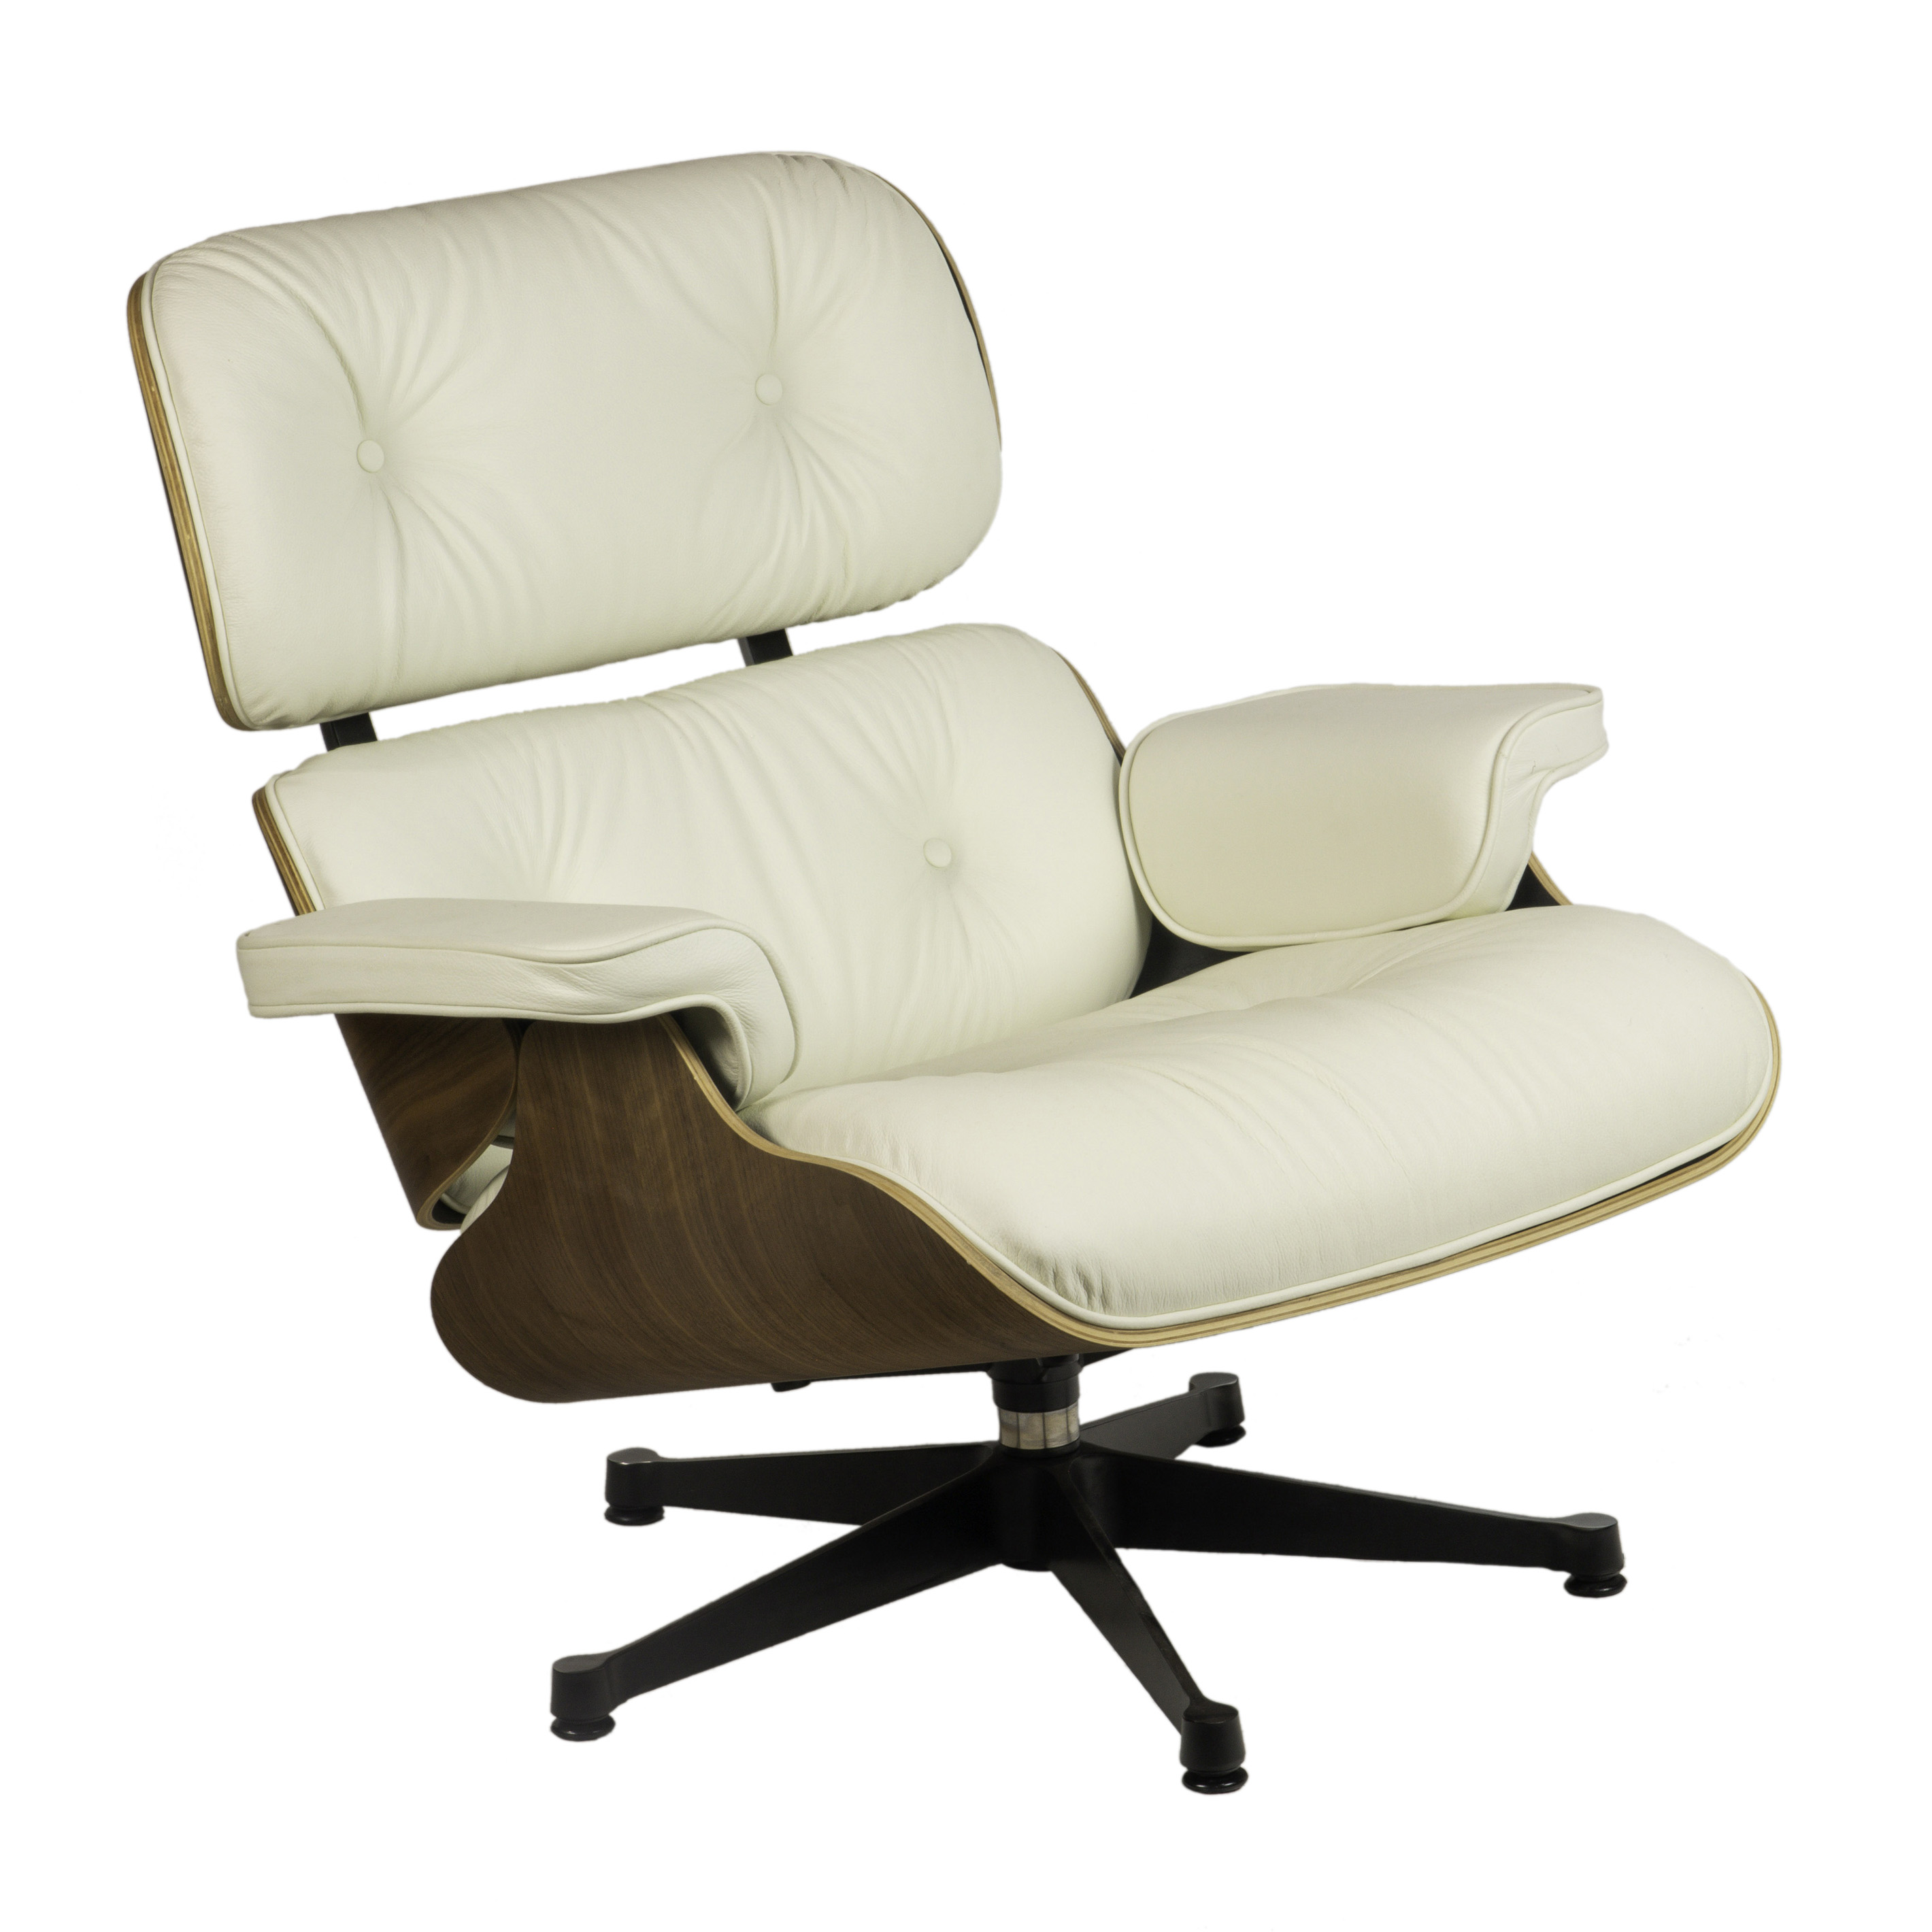 EAMES STYLE 670 LOUNGE CHAIR FOR 3a489a